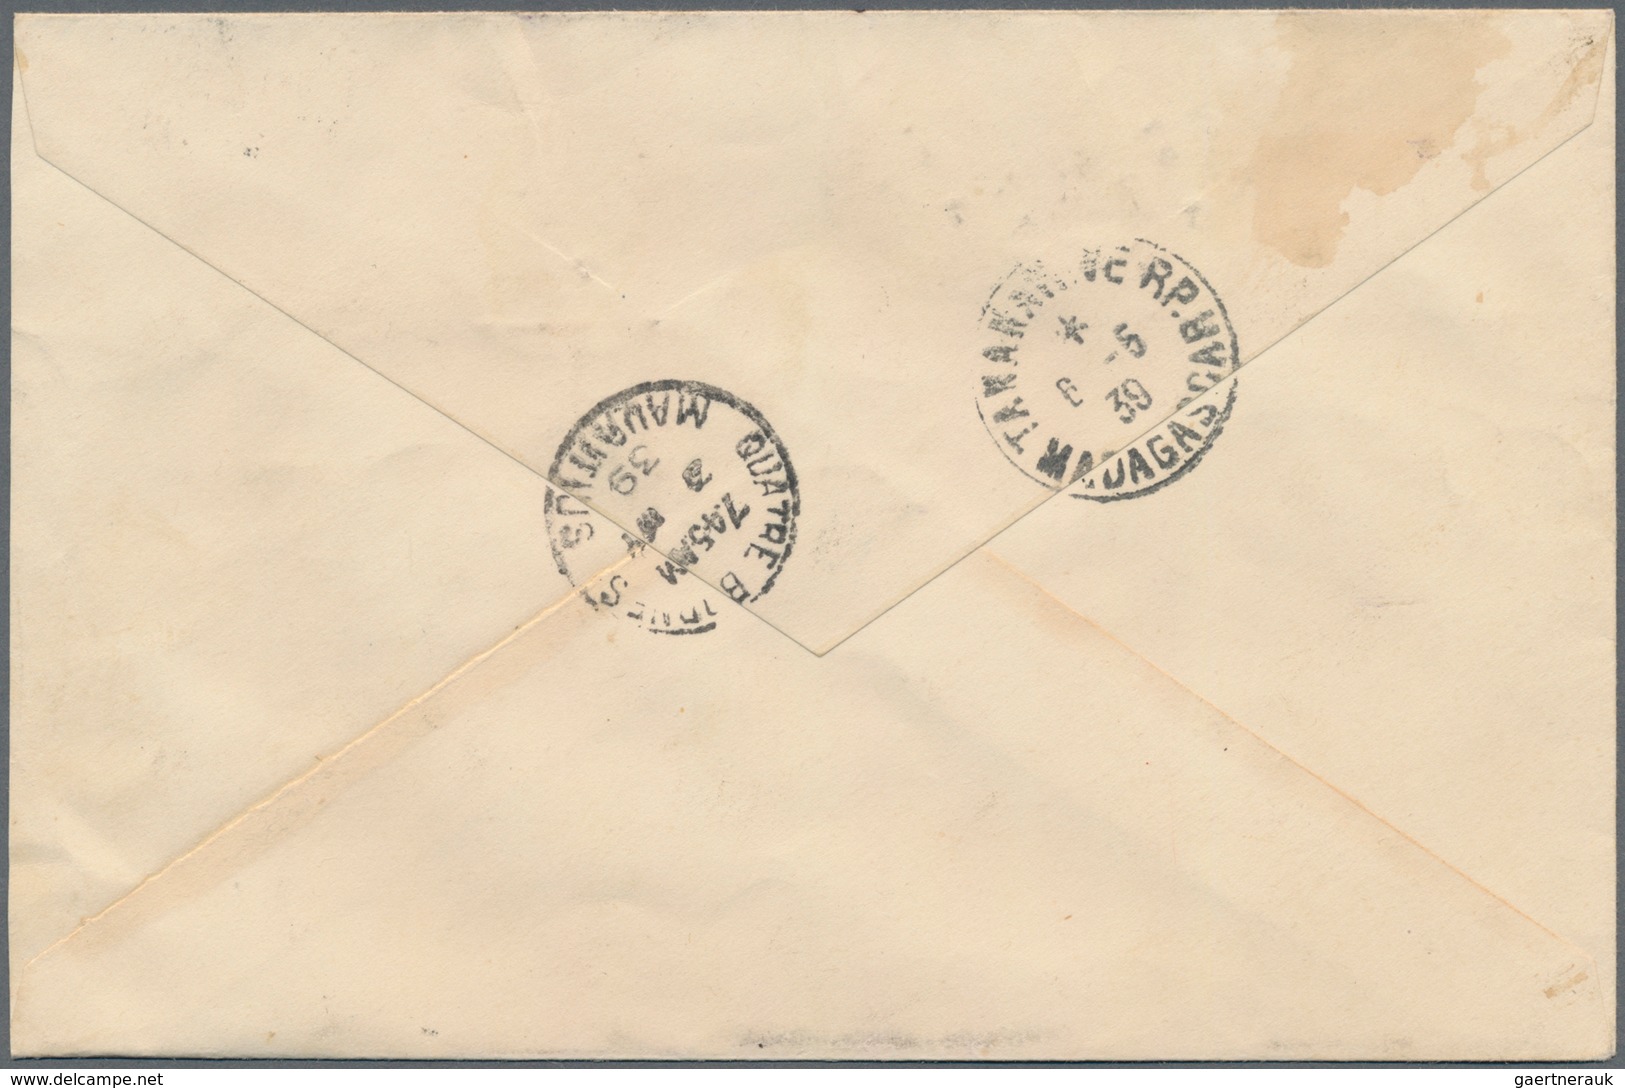 Mauritius: 1939 Registered Cover From Quatre Bornes To Tananarive, Madagascar Franked By Two Singles - Mauritius (...-1967)